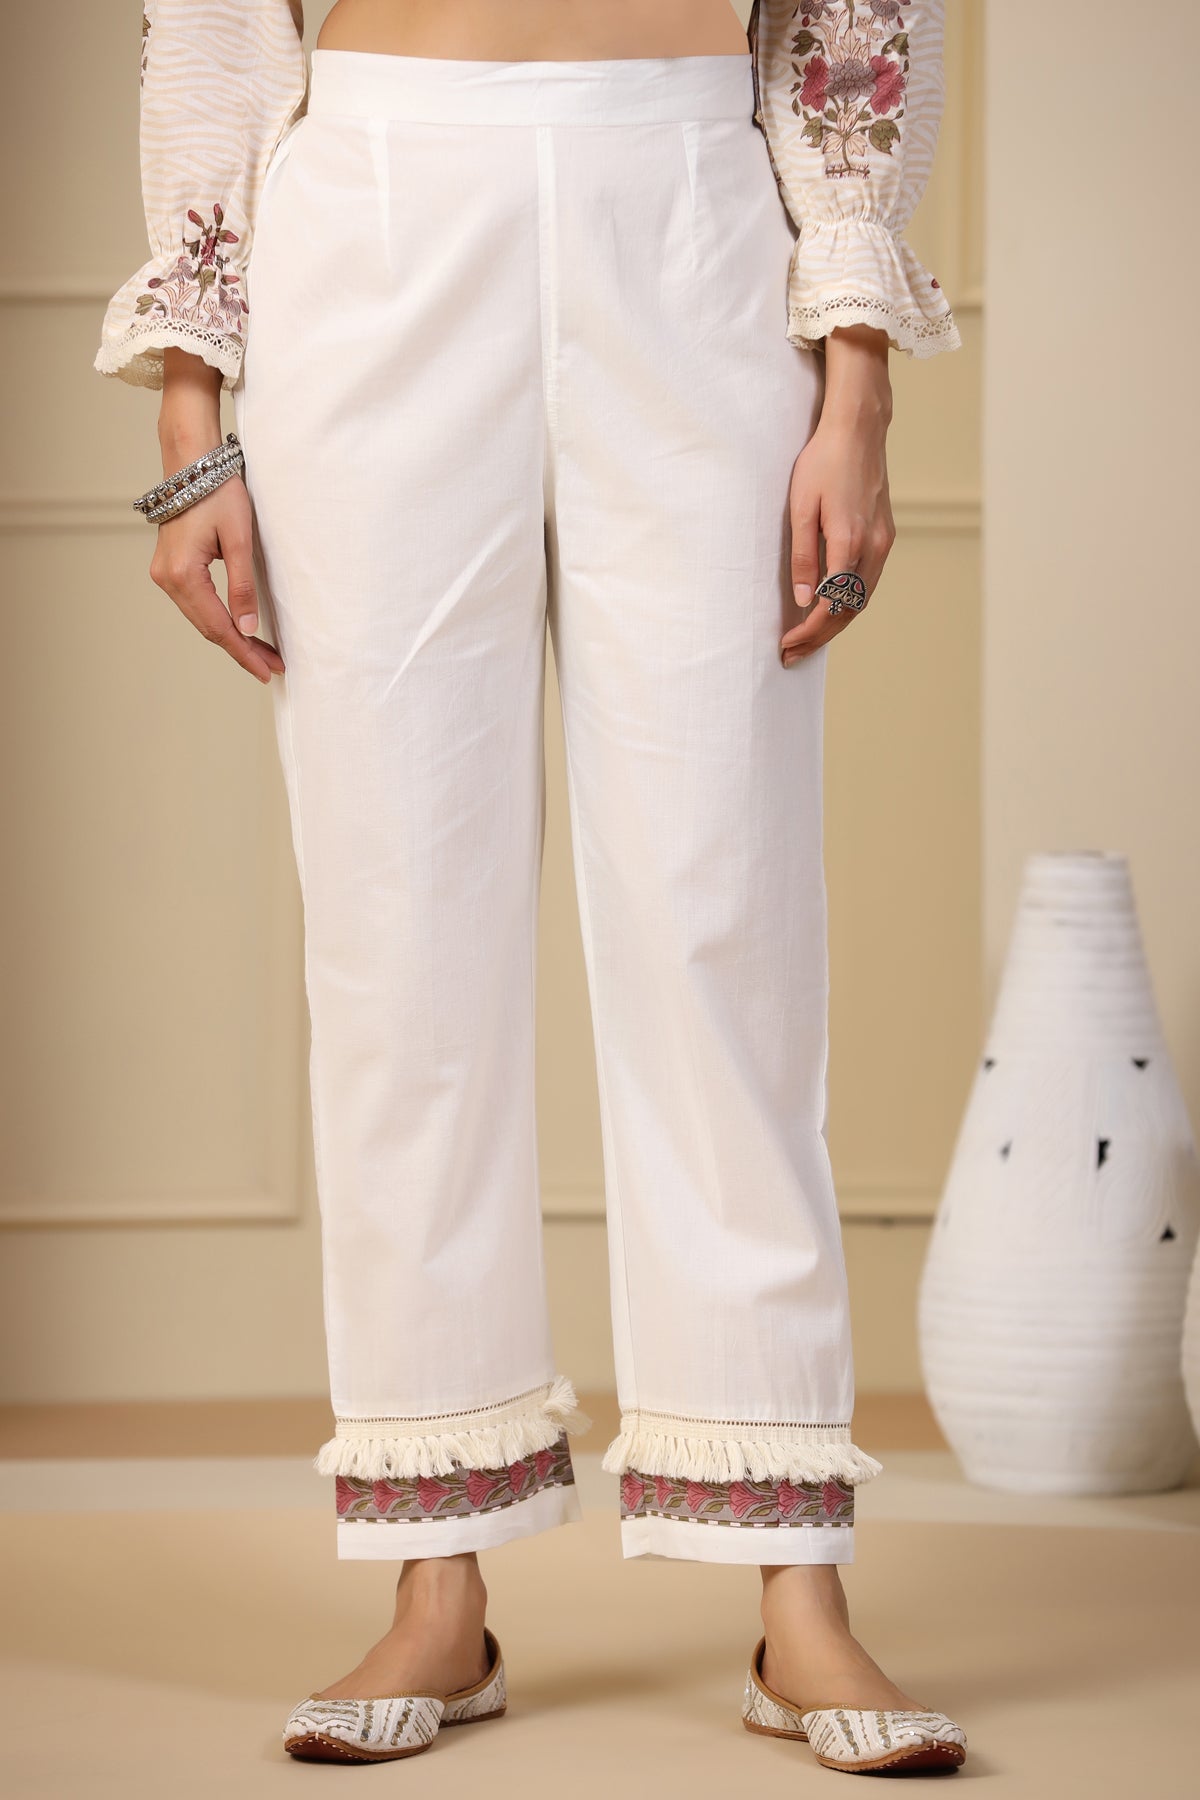 Firdous Zohra Relaxed Fit Cotton Pants - shahenazindia